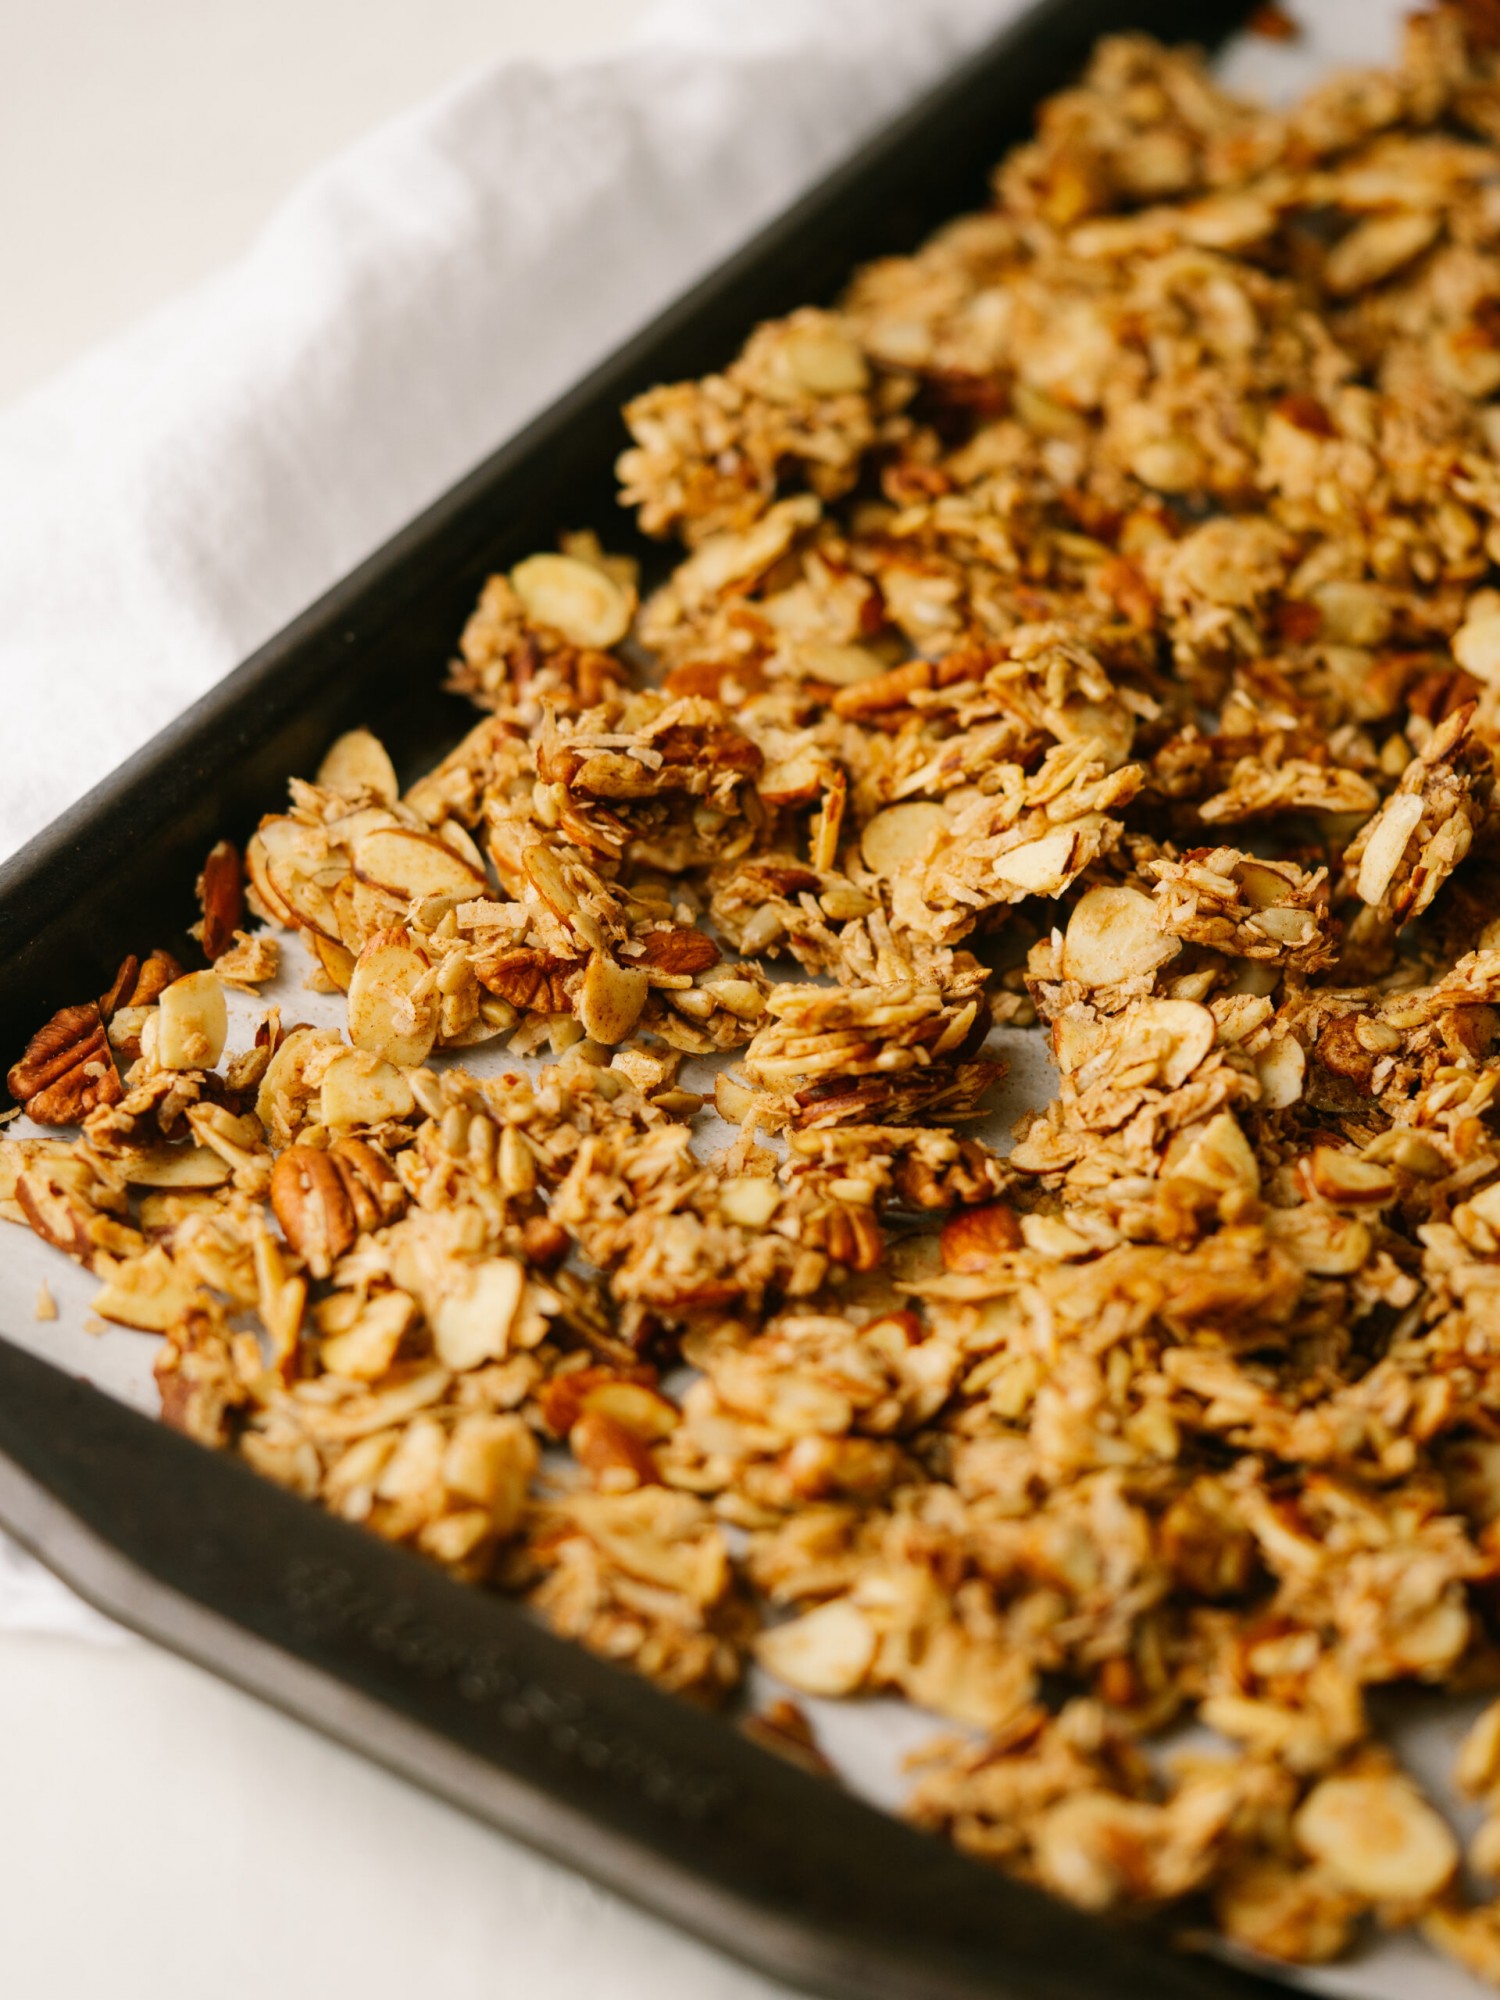 Grain free granola cooling on a sheet pan that is lined with parchment paper